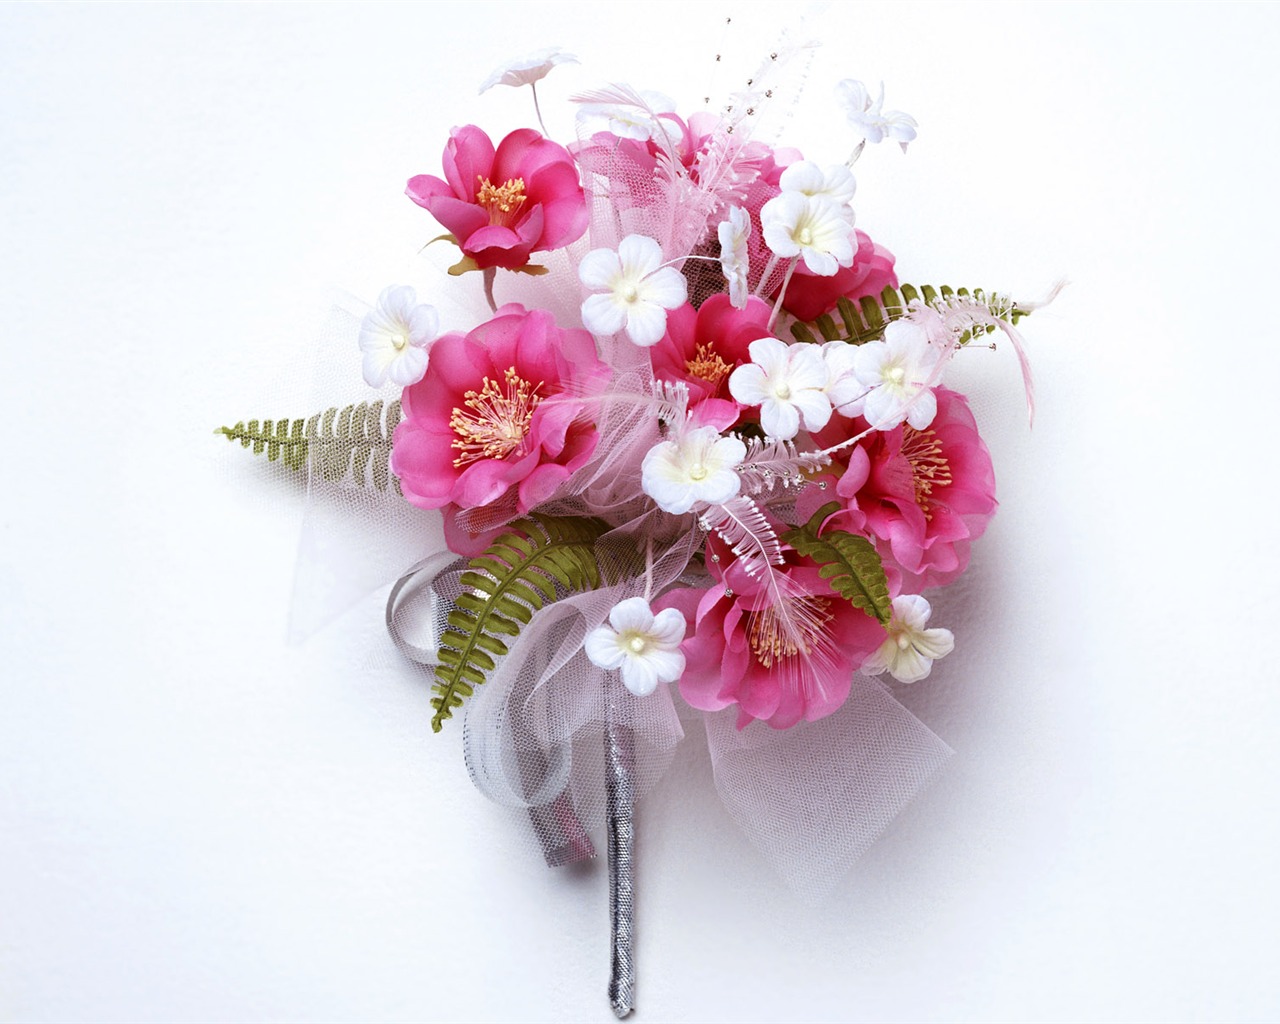 Wedding Flowers items wallpapers (2) #11 - 1280x1024